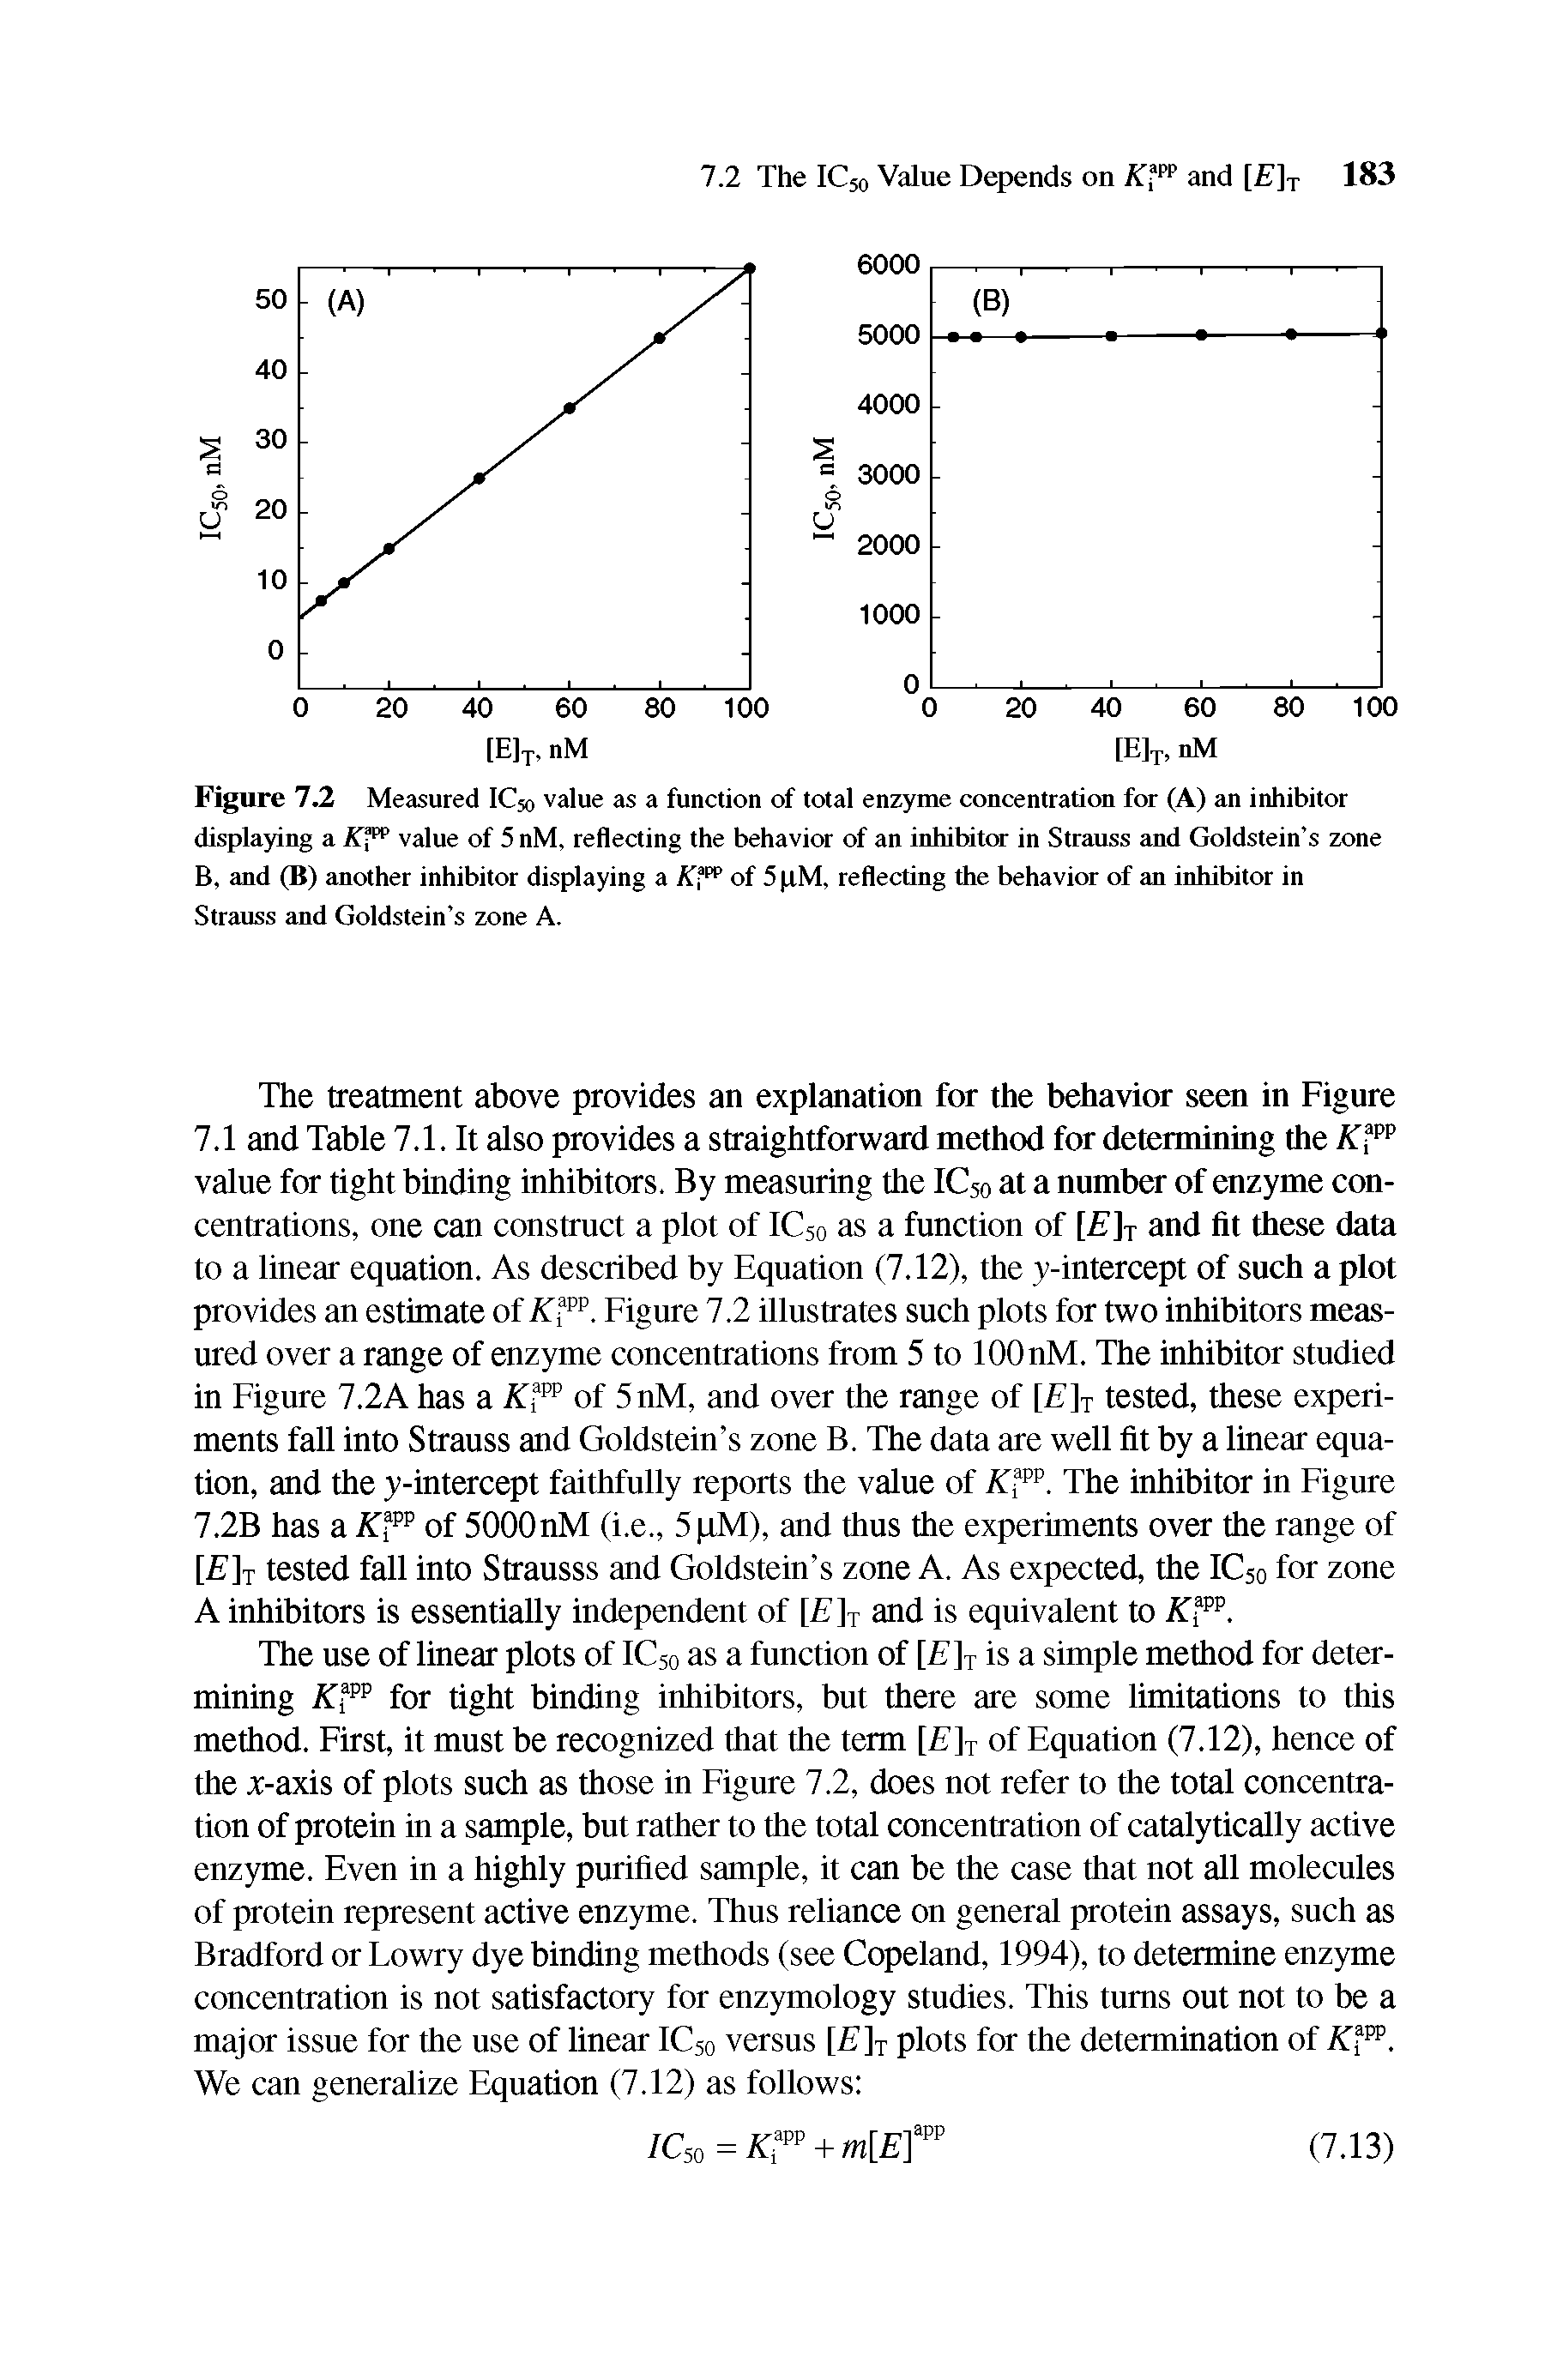 Figure 7.2 Measured IC50 value as a function of total enzyme concentration for (A) an inhibitor displaying a ATfpp value of 5 nM, reflecting the behavior of an inhibitor in Strauss and Goldstein s zone B, and (B) another inhibitor displaying a K ff of 5 lM, reflecting the behavior of an inhibitor in Strauss and Goldstein s zone A.